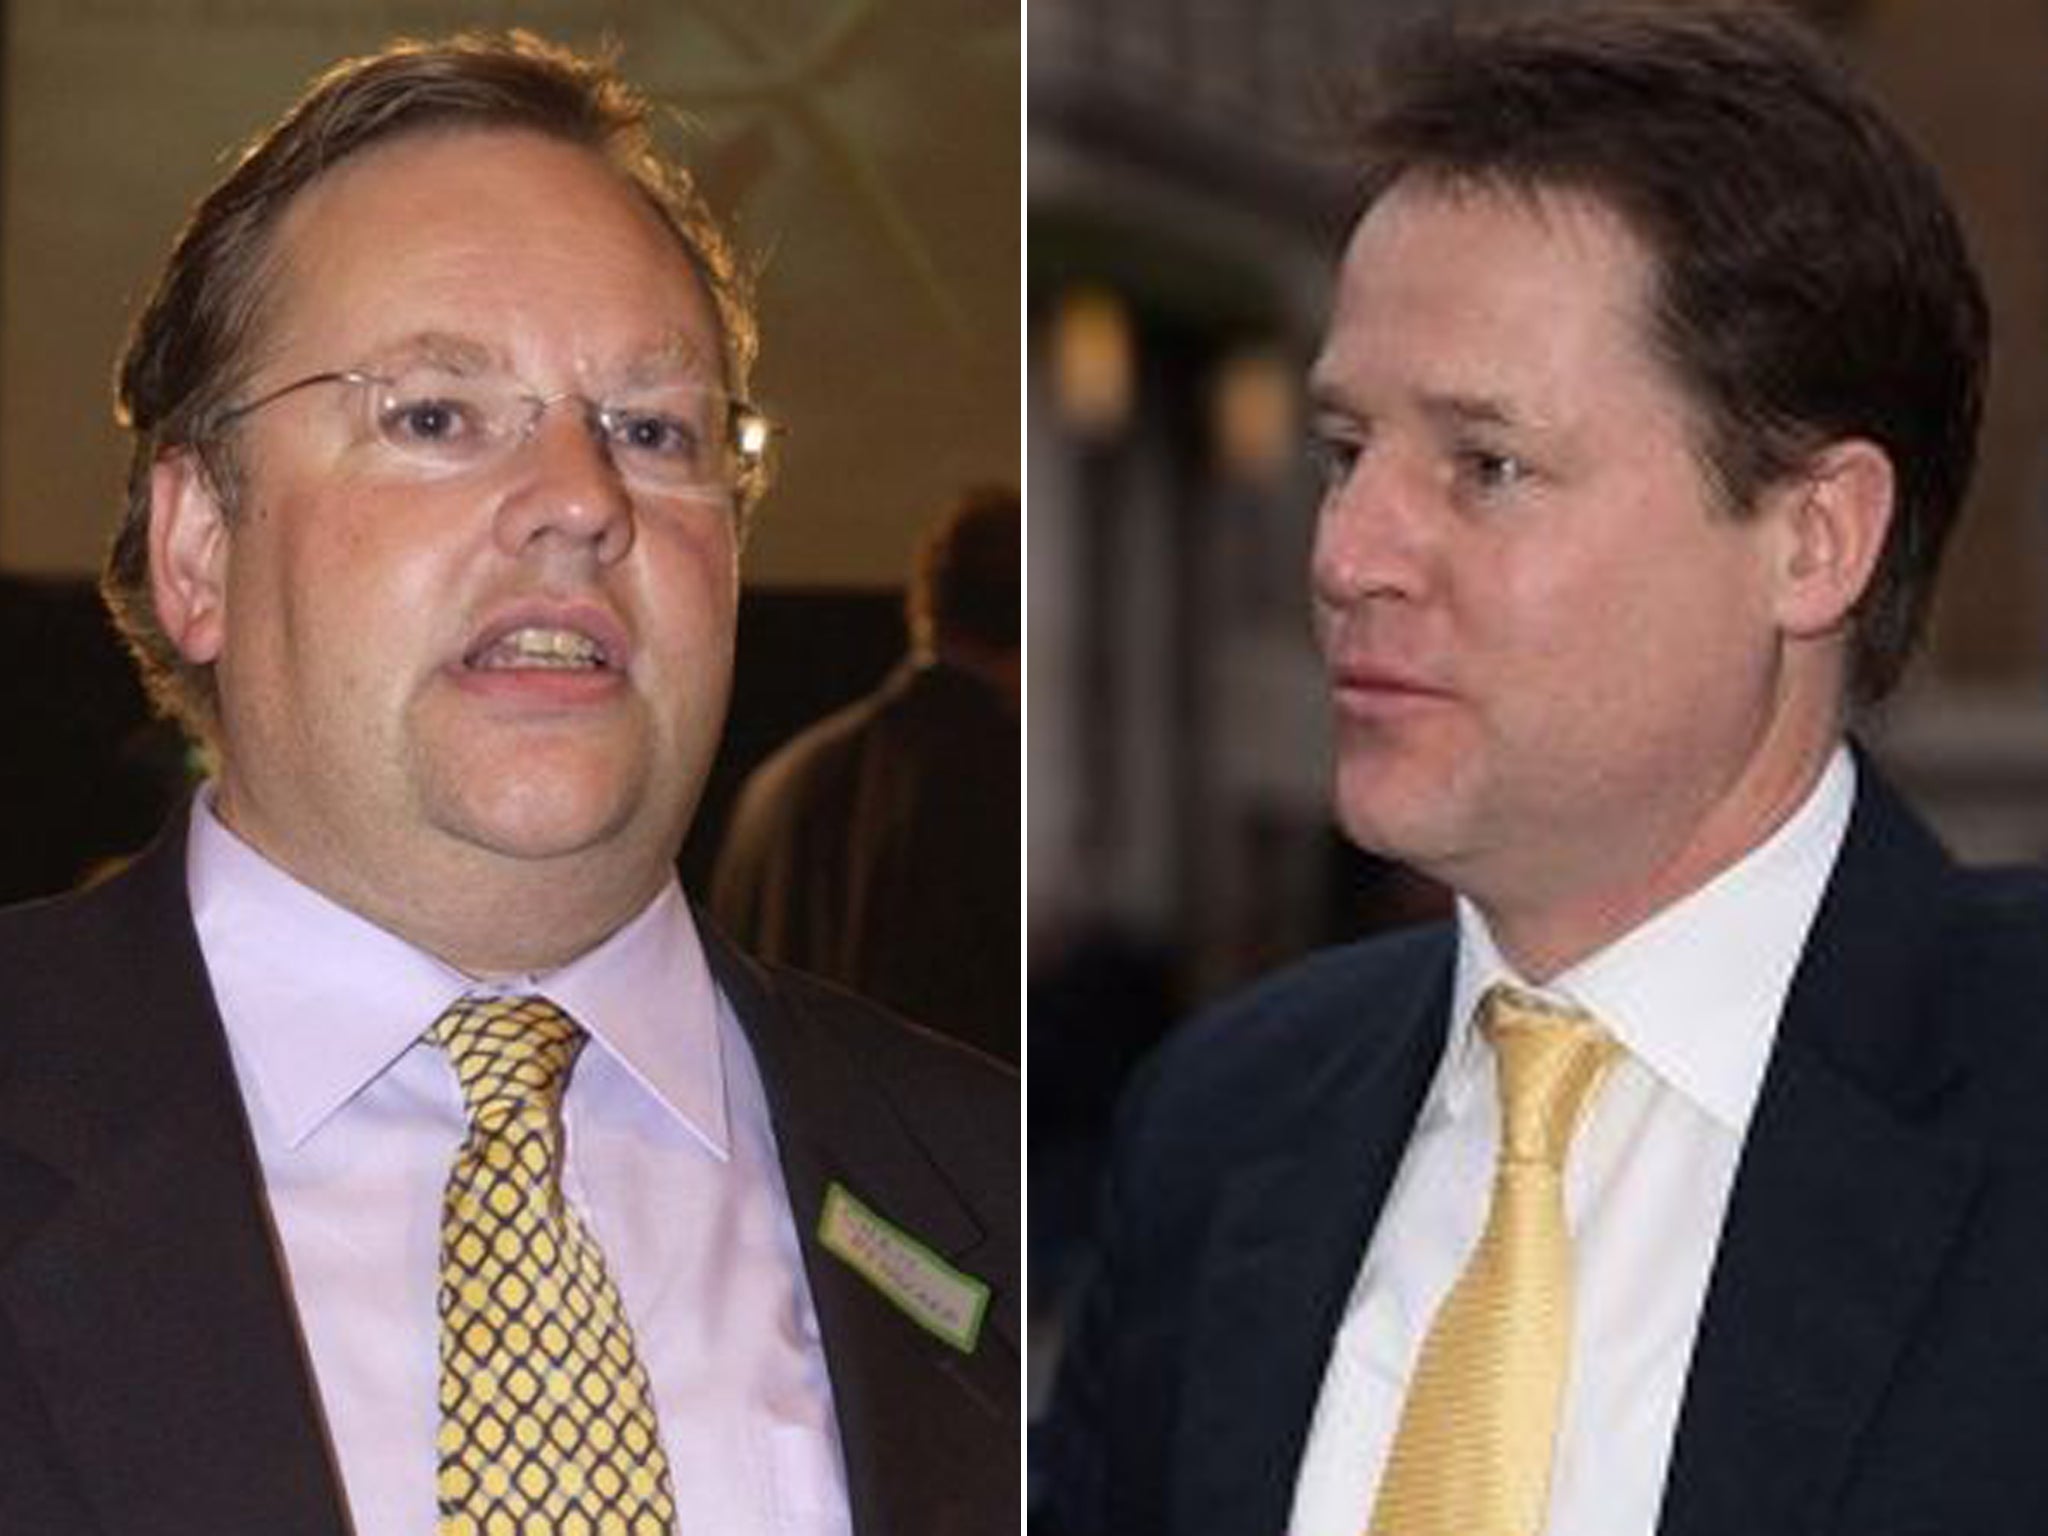 The Lord Rennard issue is increasingly being seen as a test of Nick Clegg's leadership of the Liberal Democrat party